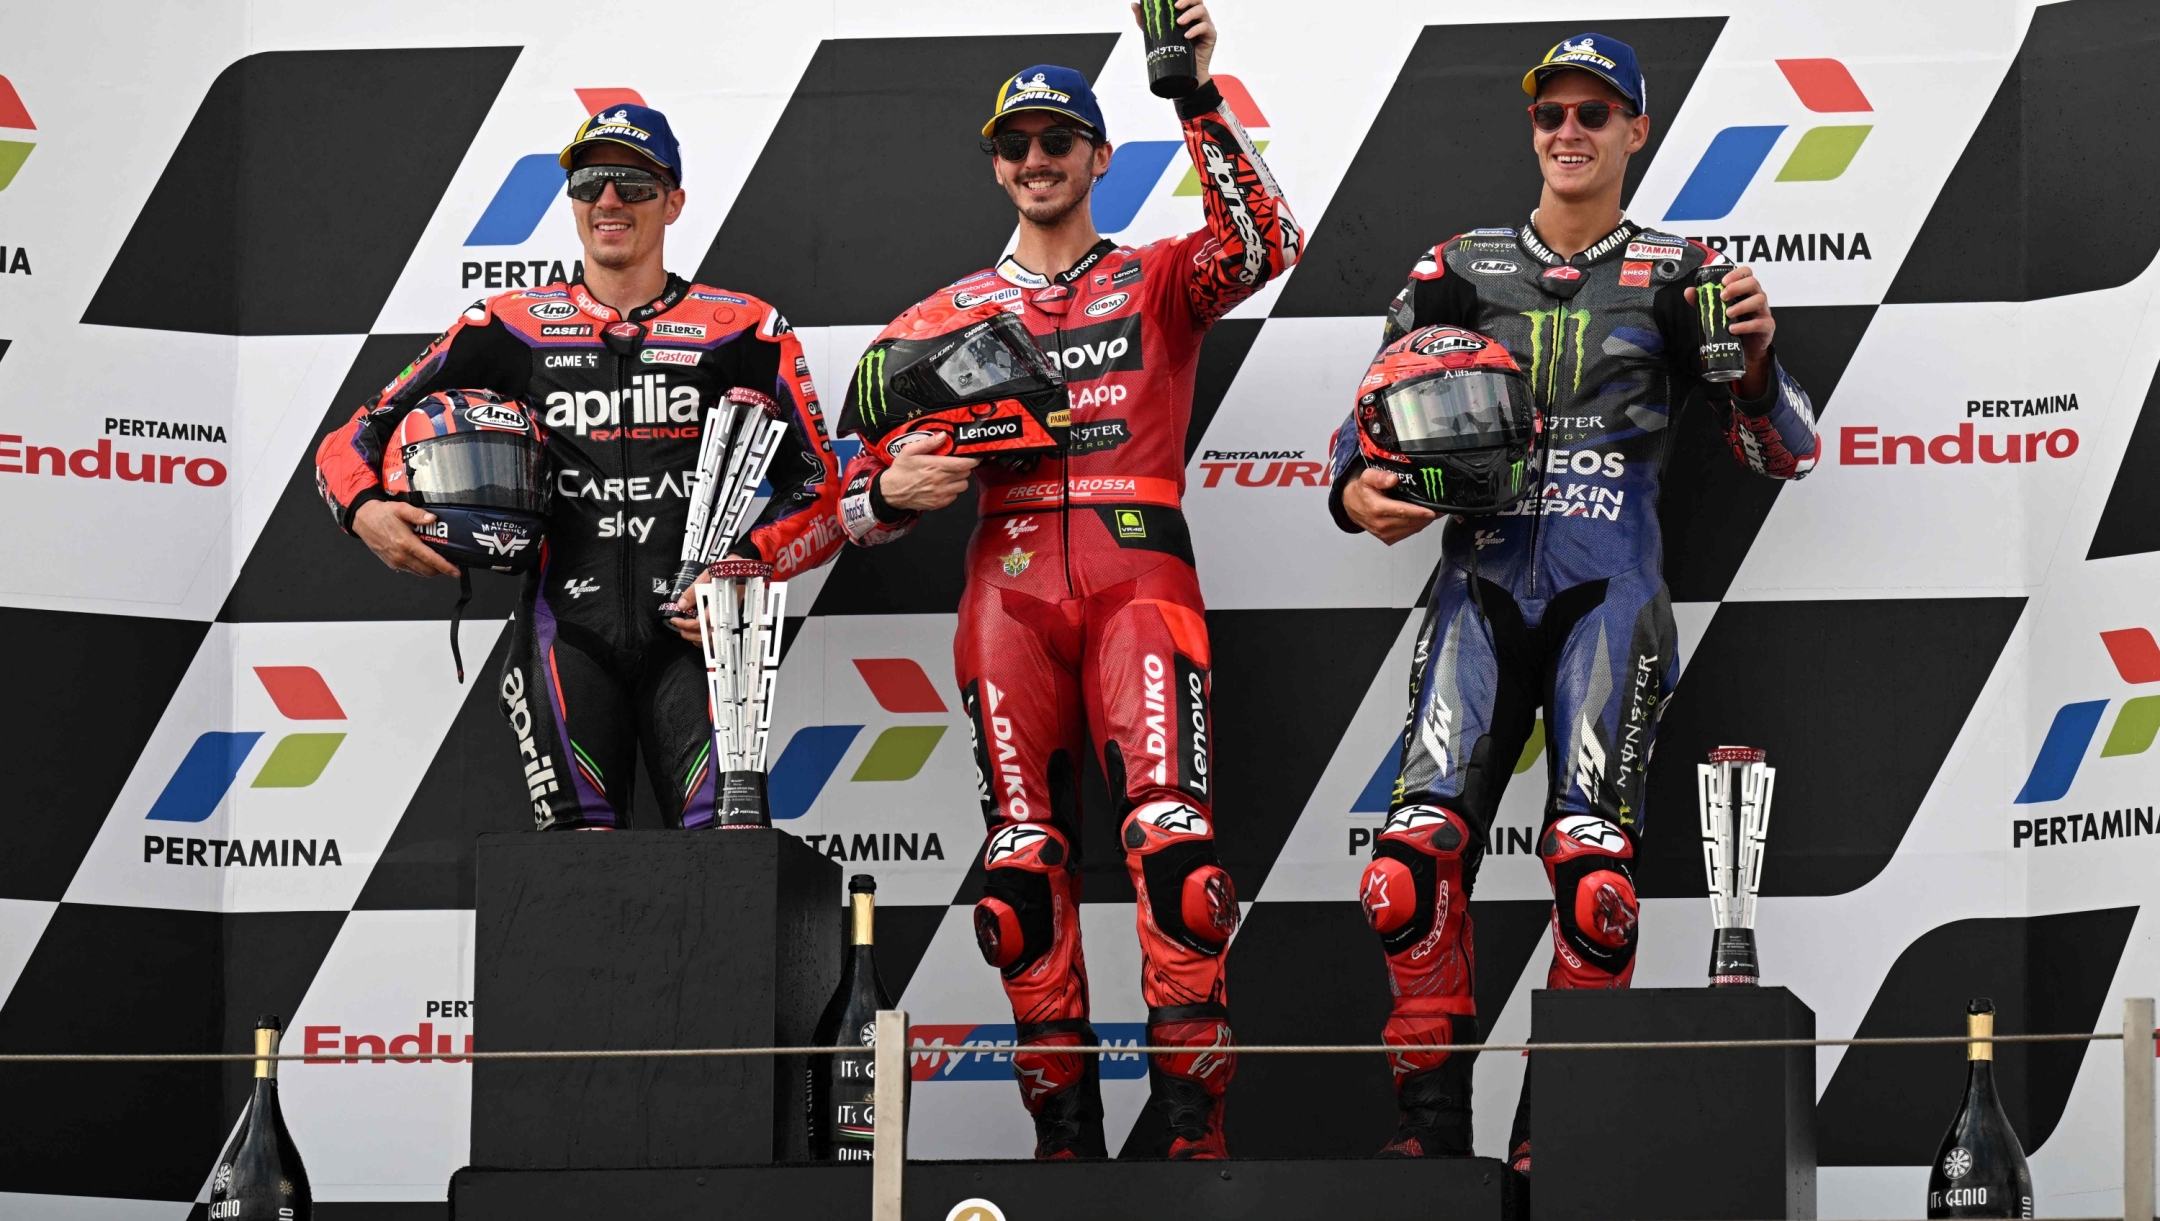 First-placed Ducati Lenovo Teams Italian rider Francesco Bagnaia (C), Second-placed Aprilia racings Spanish rider Maverick Vinales (L), and third-placed Monster Energy Yamaha MotoGP's French rider Fabio Quartararo celebrate during the podium ceremony after competing in the Indonesian Grand Prix MotoGP at the Mandalika International Circuit in Kuta Mandalika, Central Lombok on October 15, 2023. (Photo by SONNY TUMBELAKA / AFP)